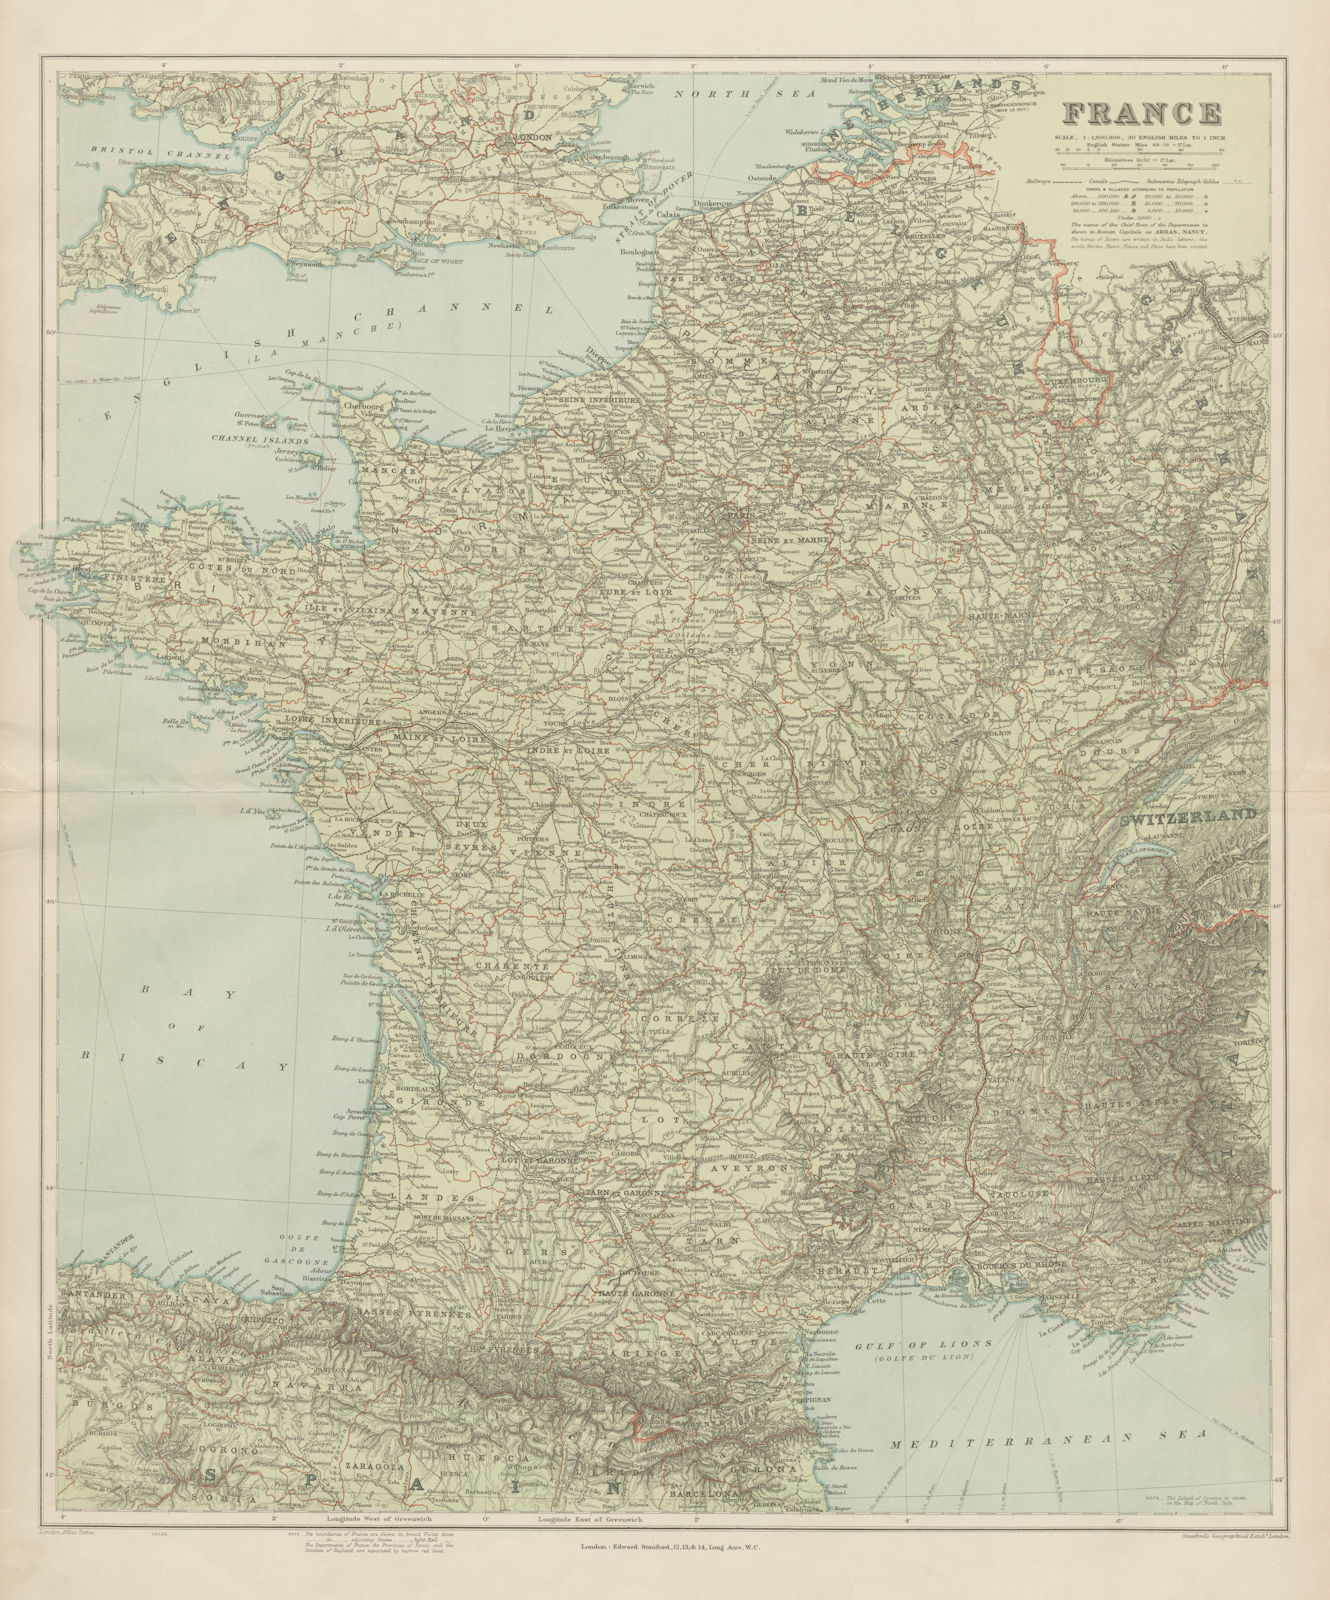 Associate Product France physical. Mountains & rivers. Large 66x55cm. STANFORD 1904 old map